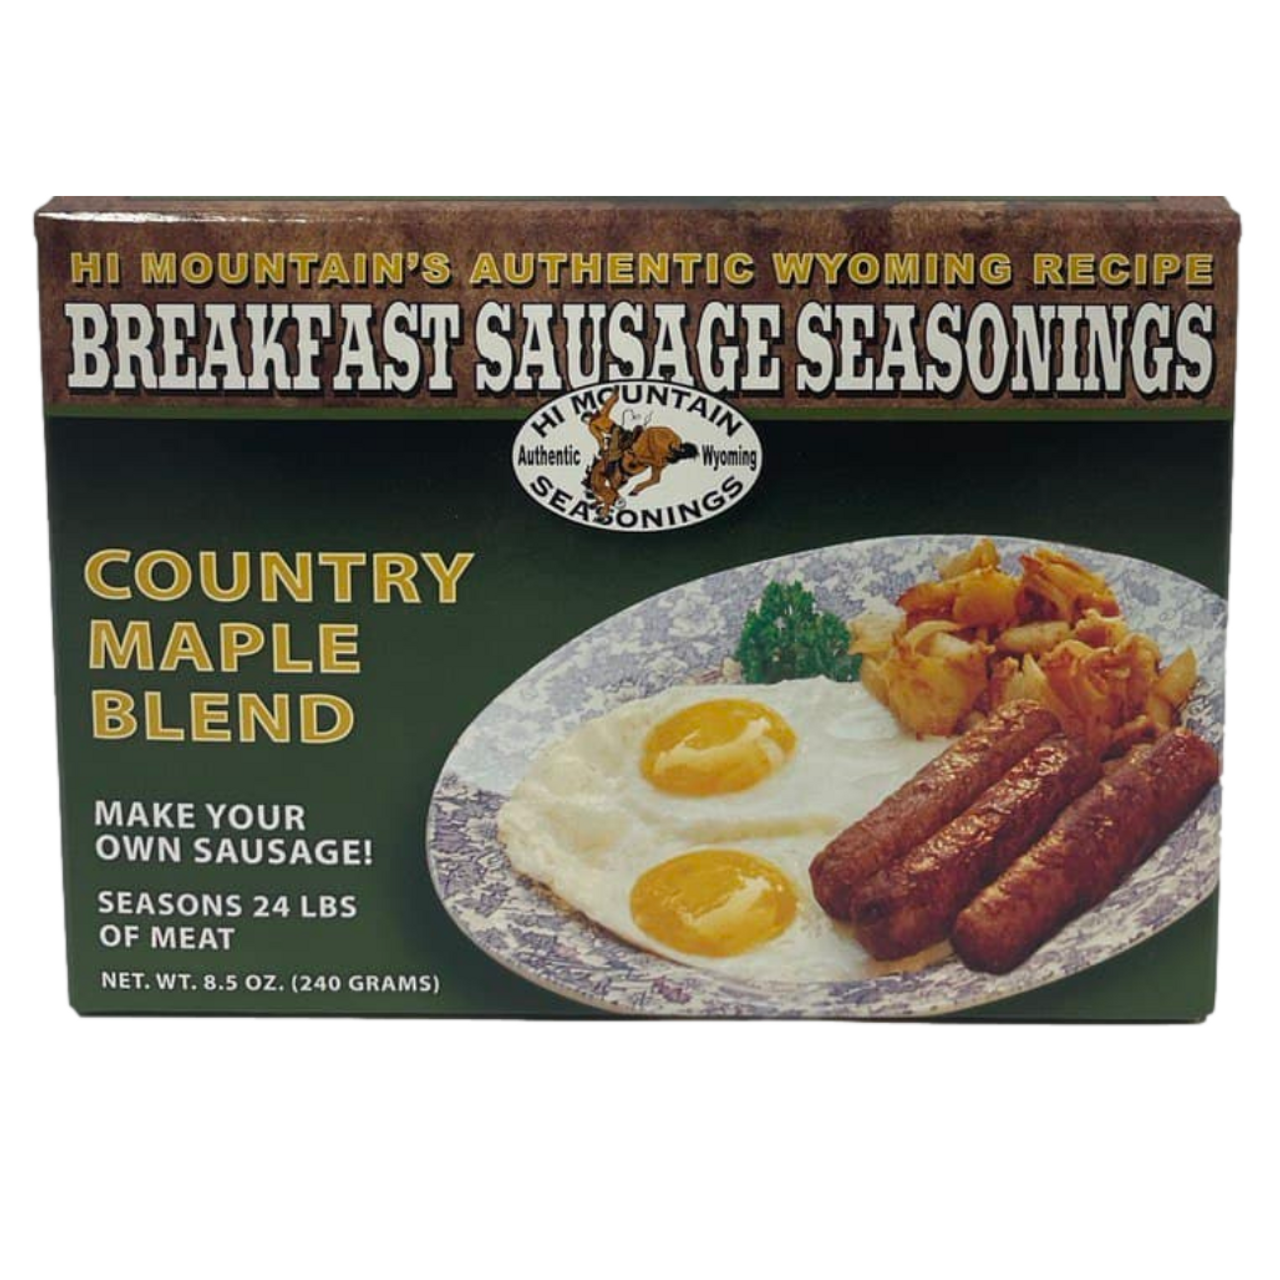 https://cdn11.bigcommerce.com/s-x8y6yj0di0/images/stencil/1280x1280/products/452/979/Hi_Mountain_Breakfast_Sausage_Seasonings_Country_Maple_Blend_front__26509.1659555426.png?c=1